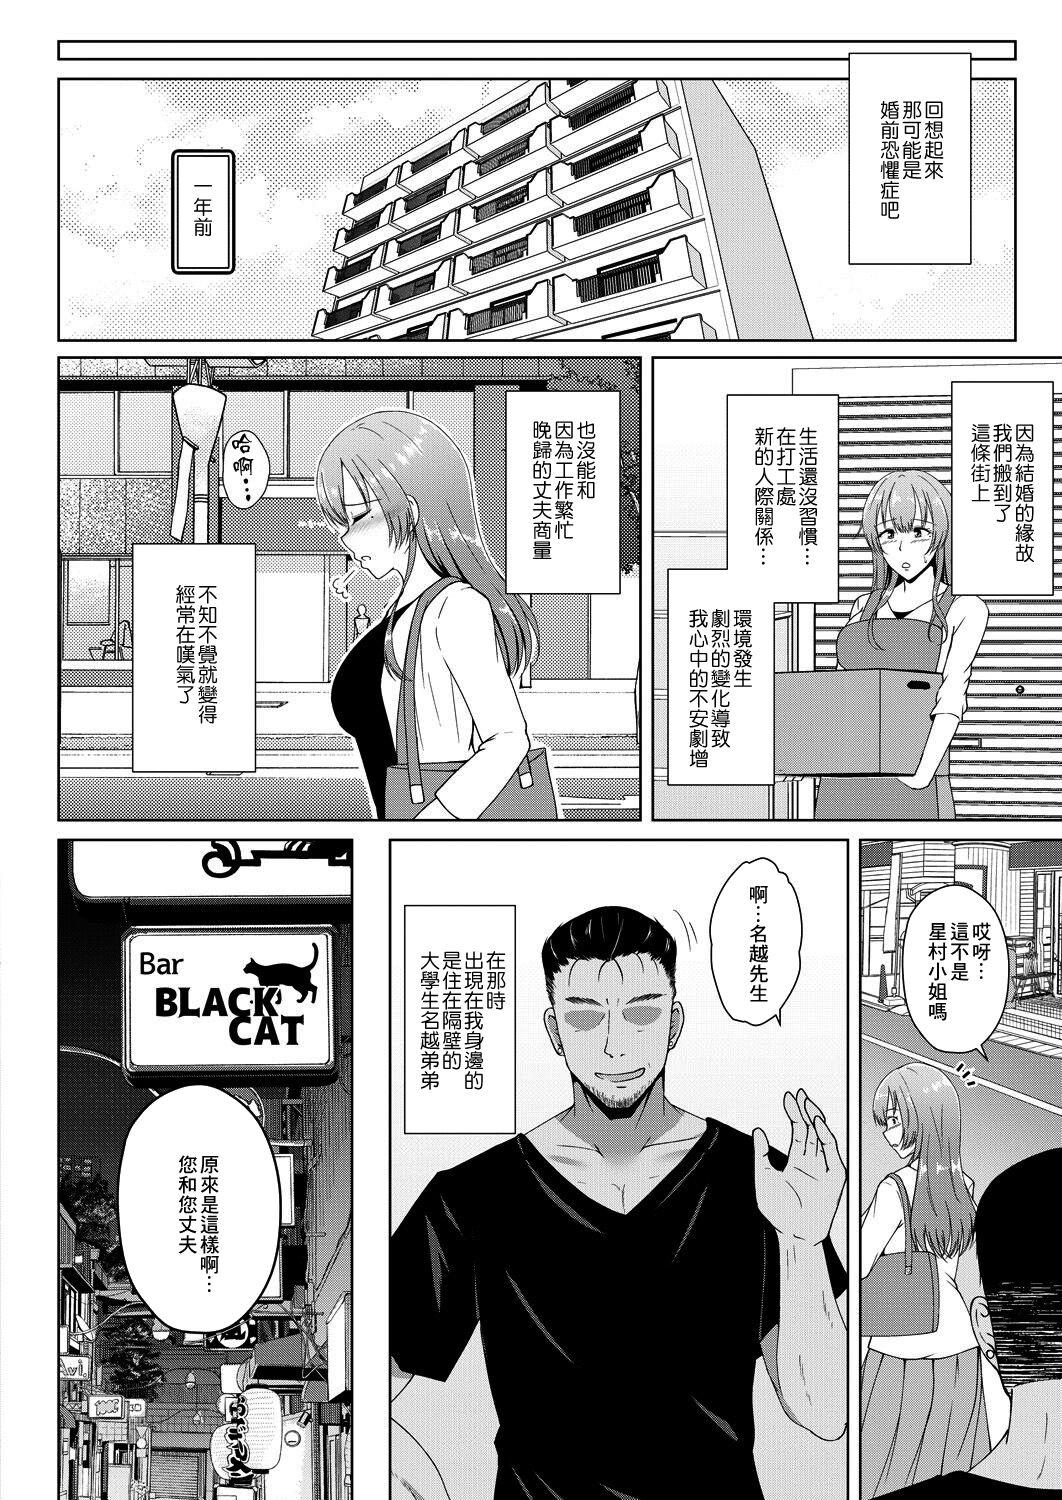 Gay 比較と選択 Class Room - Page 4